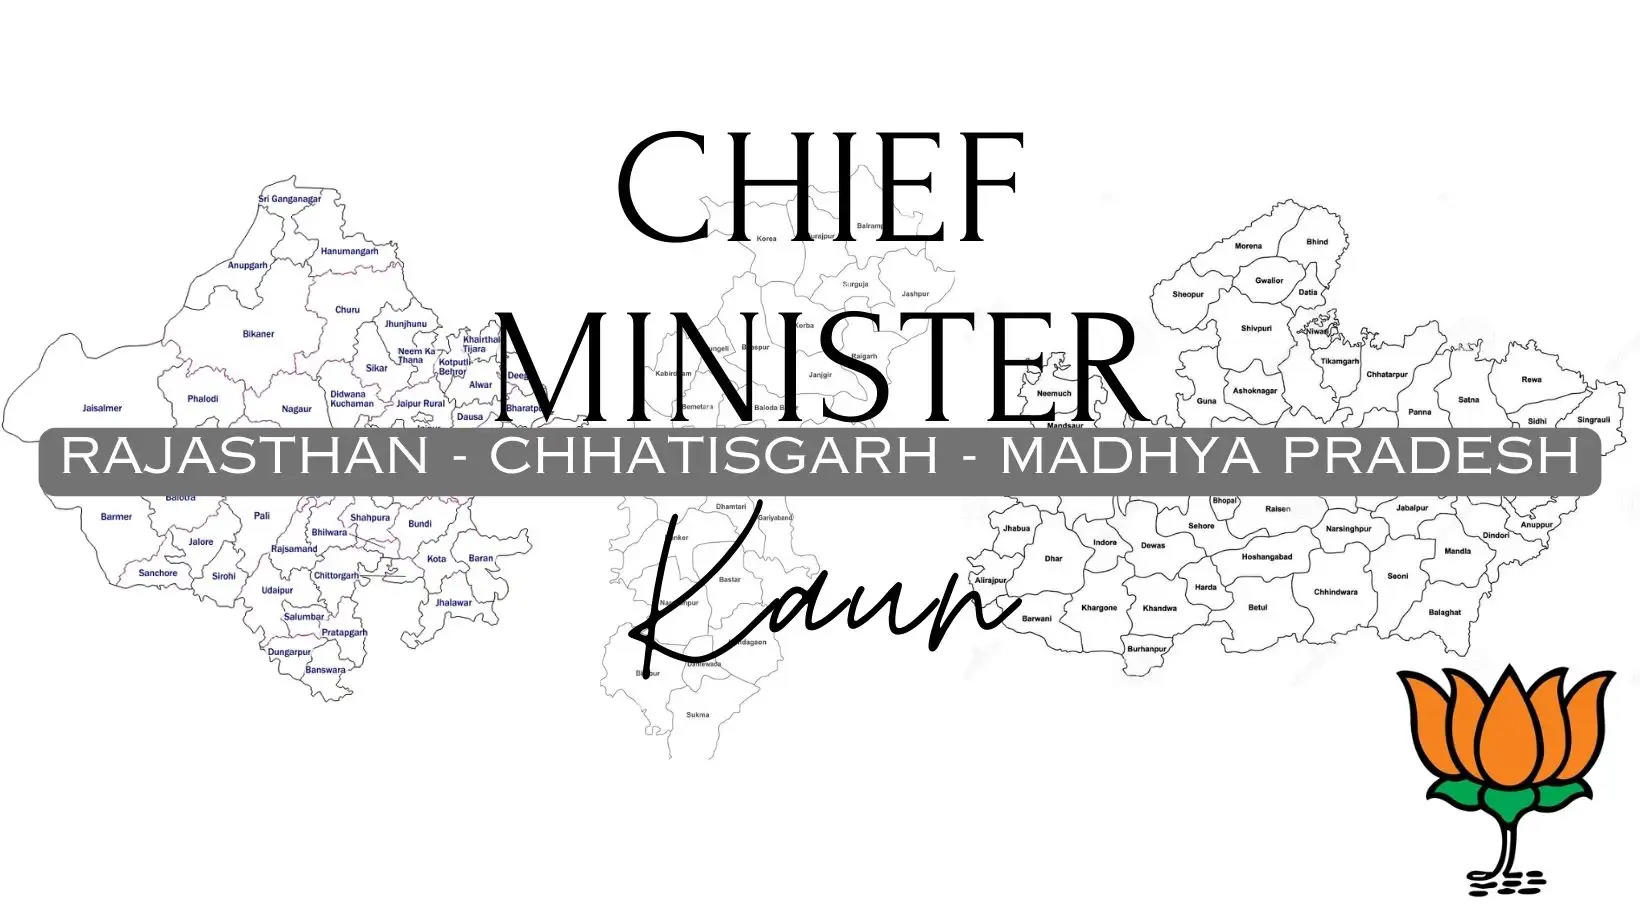 WHo is the chief minister of rajasthan, who will be the chief minister of madhya pradesh